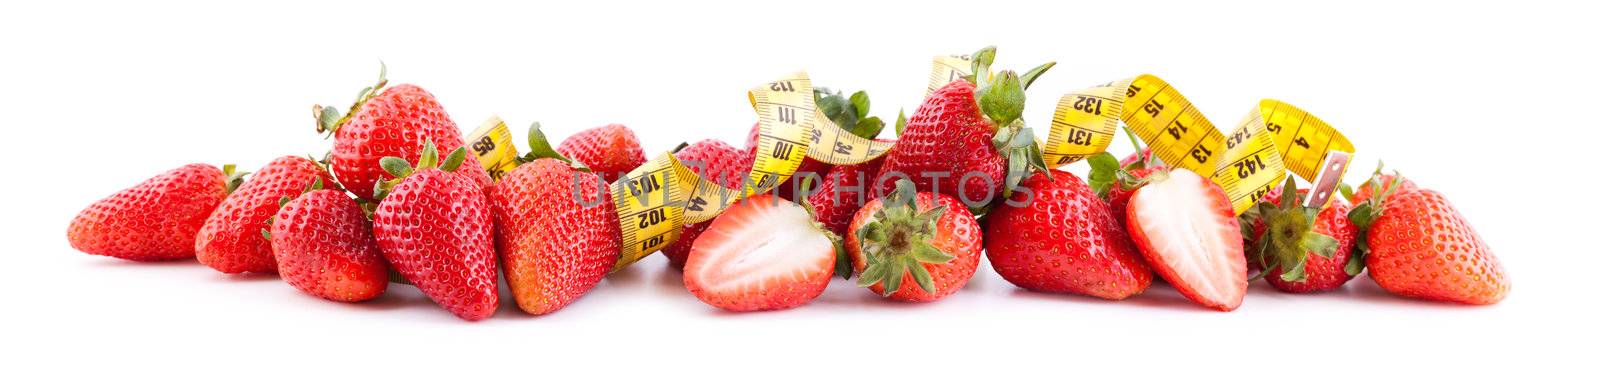 Strawberries with tape in panoramic by Gbuglok